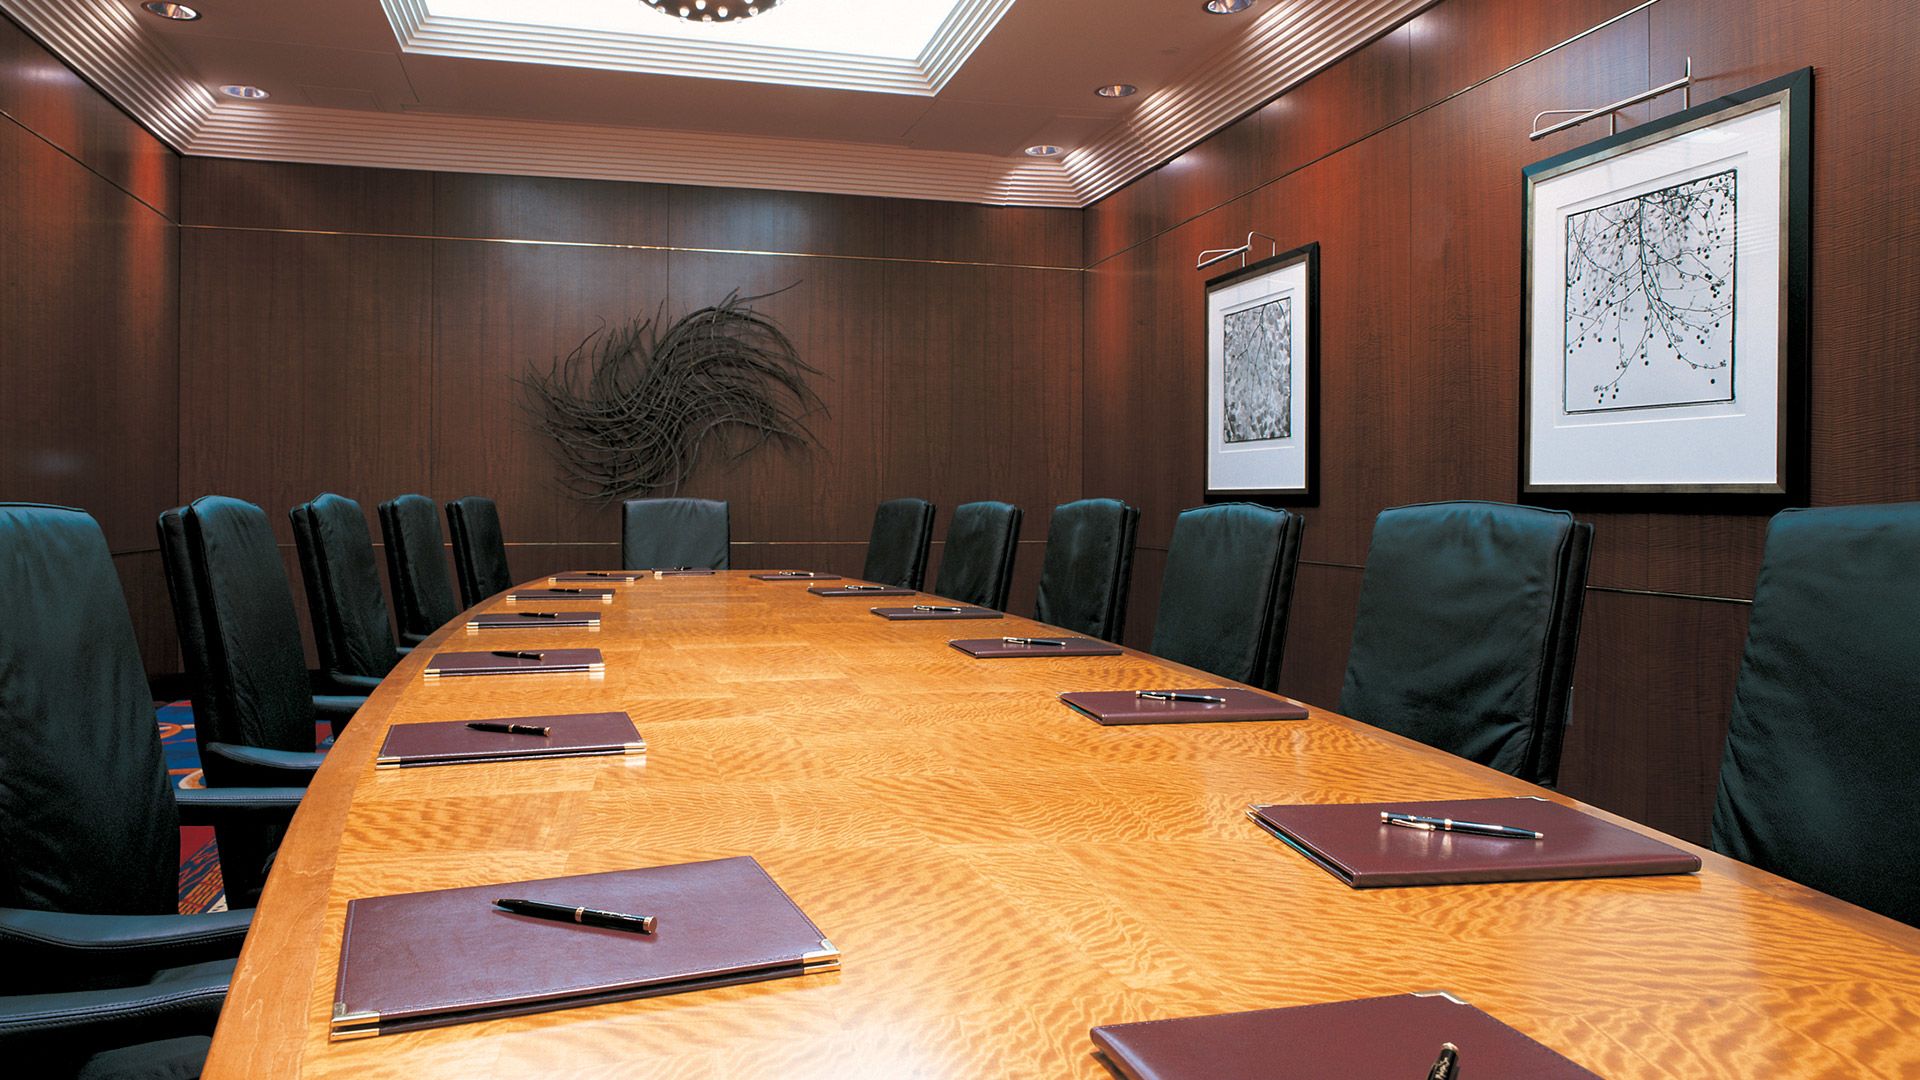 A Conference Room With A Table And Chairs